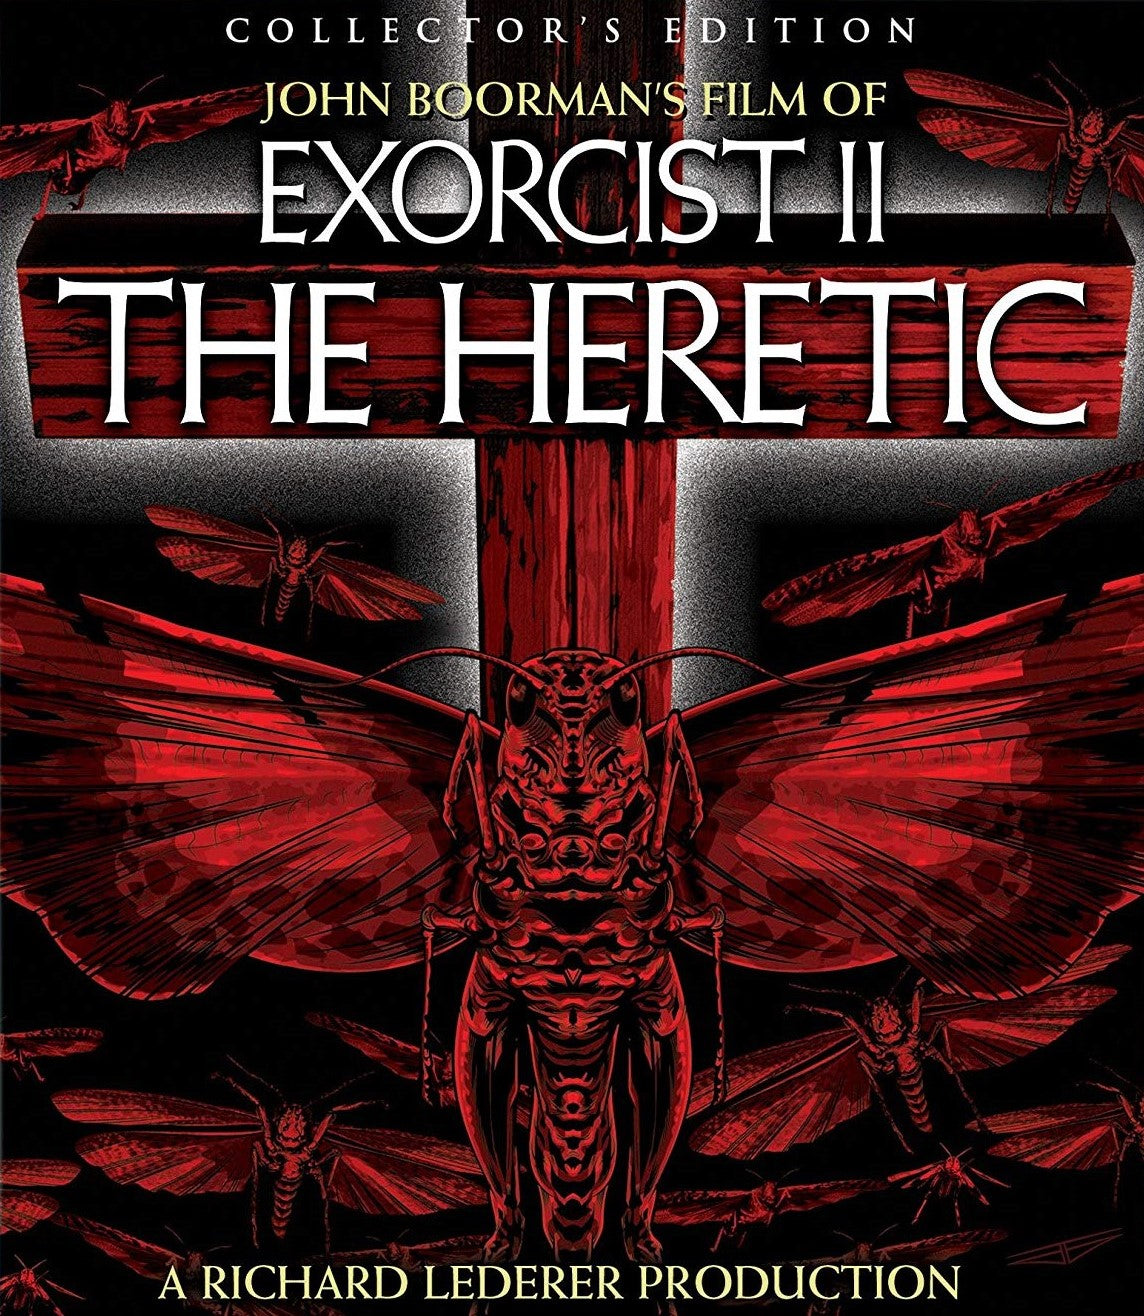 Exorcist Ii: The Heretic (Collectors Edition) Blu-Ray Blu-Ray